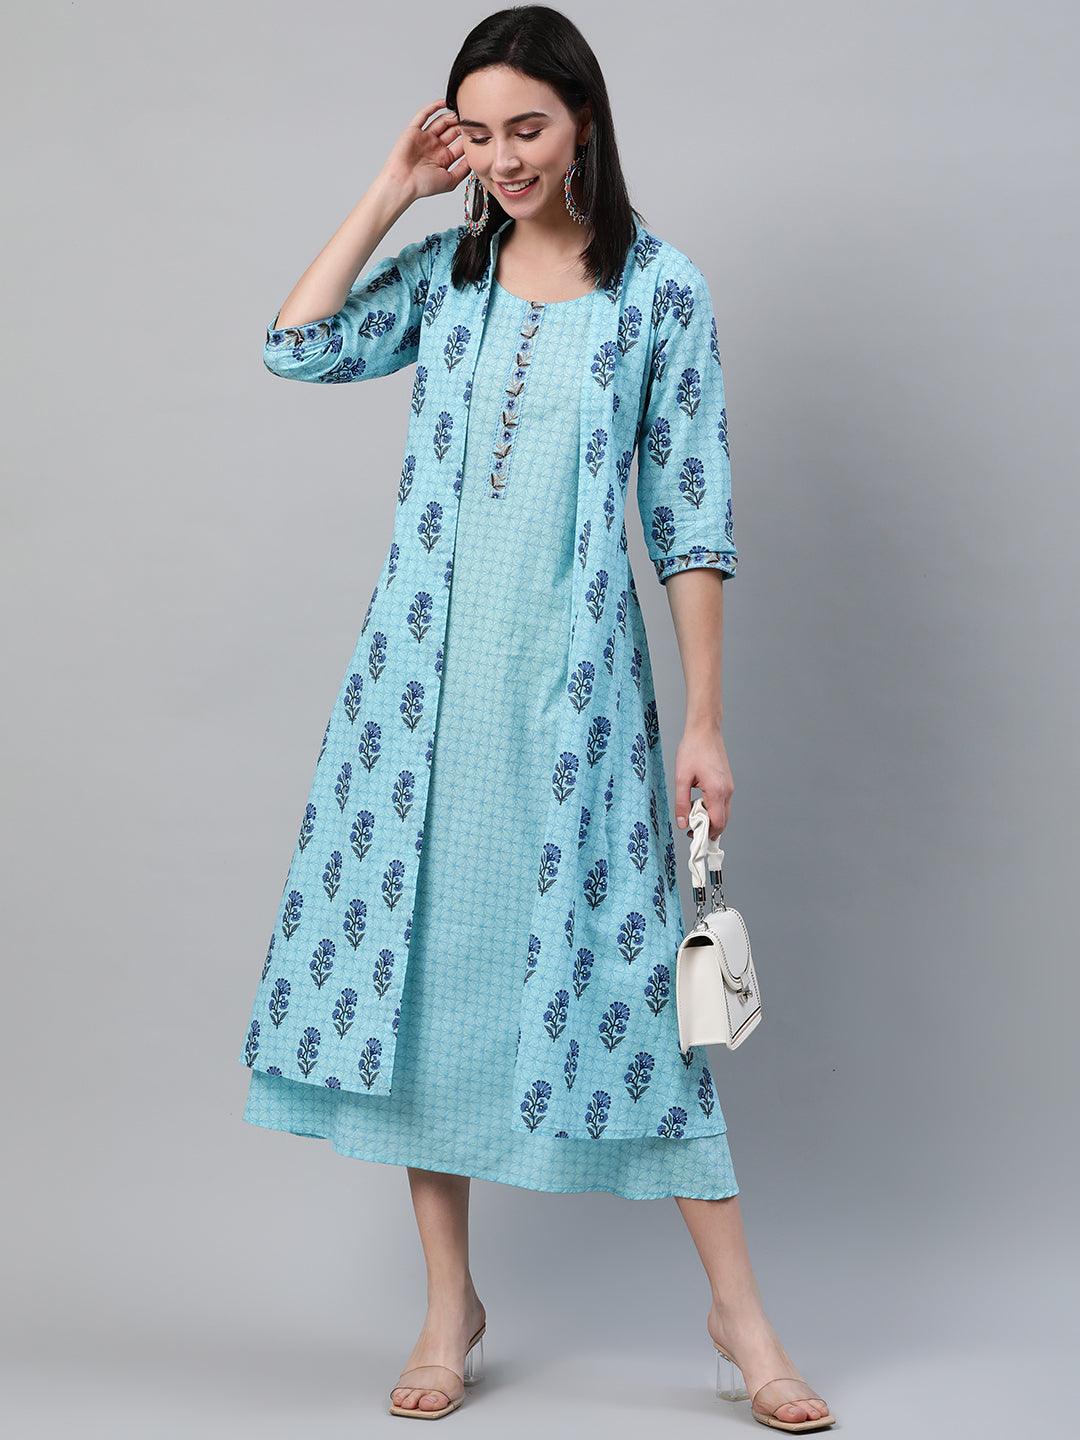 Blue Printed Cotton Dress With Jacket